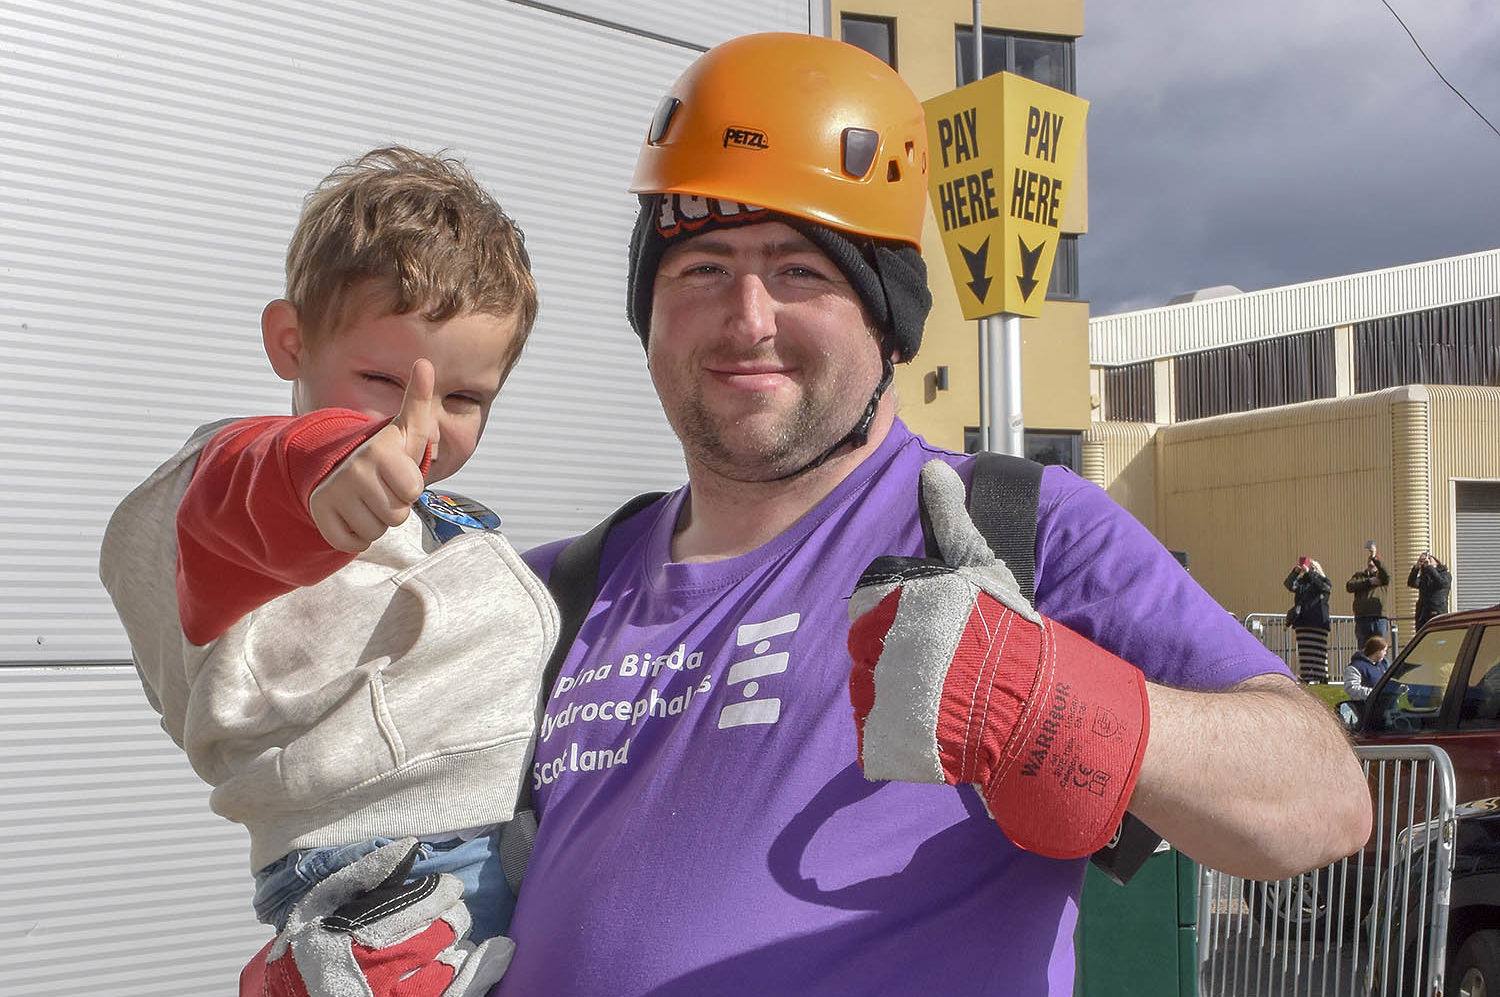 Dexon with Darren at the fundraising abseil